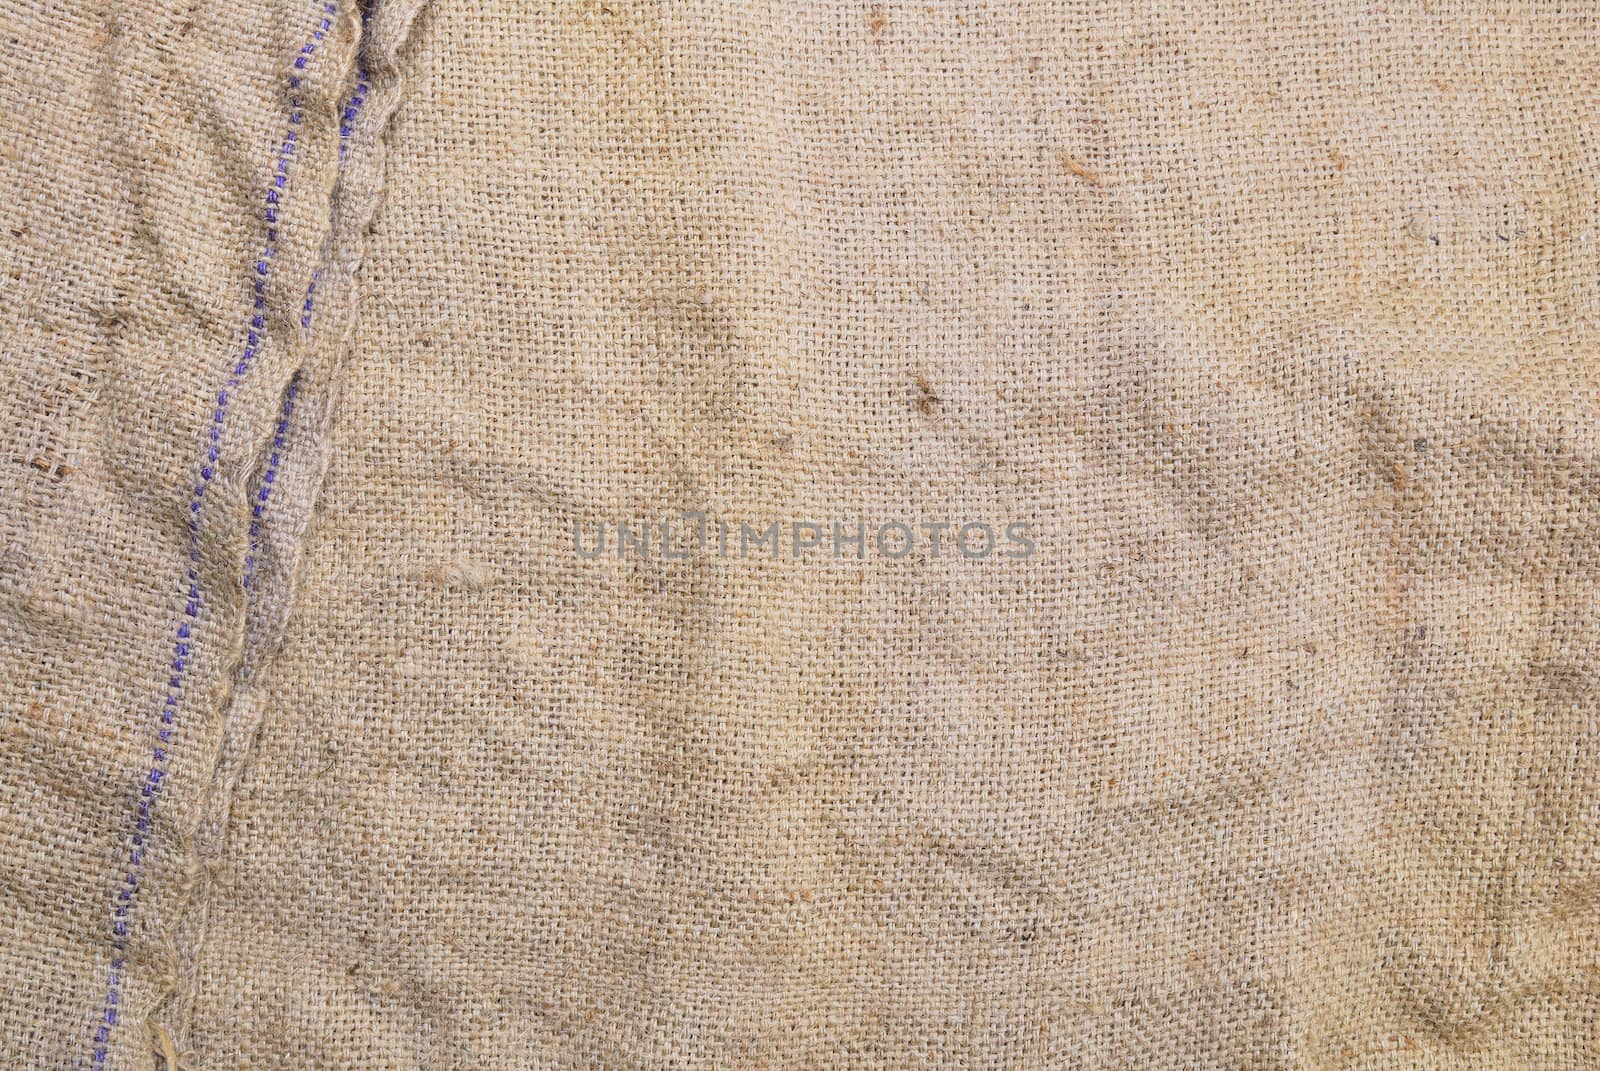 Gunny sack texture background by teen00000